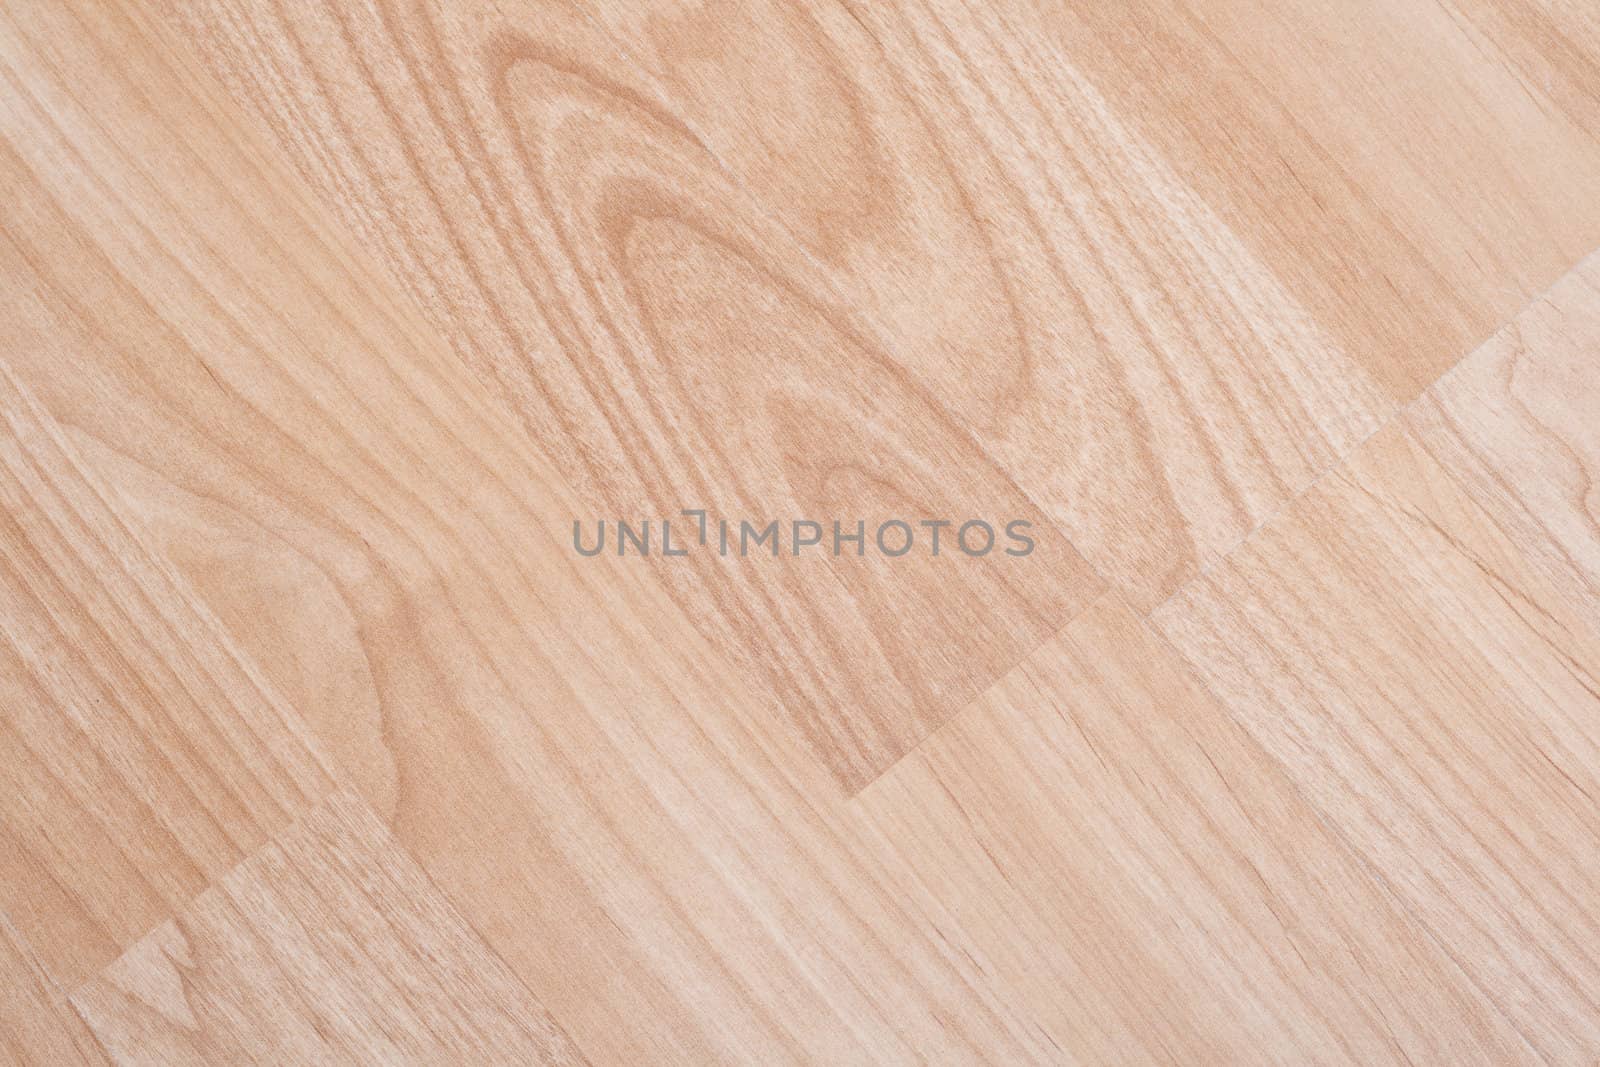 Abstract wooden background - very detailed and real...